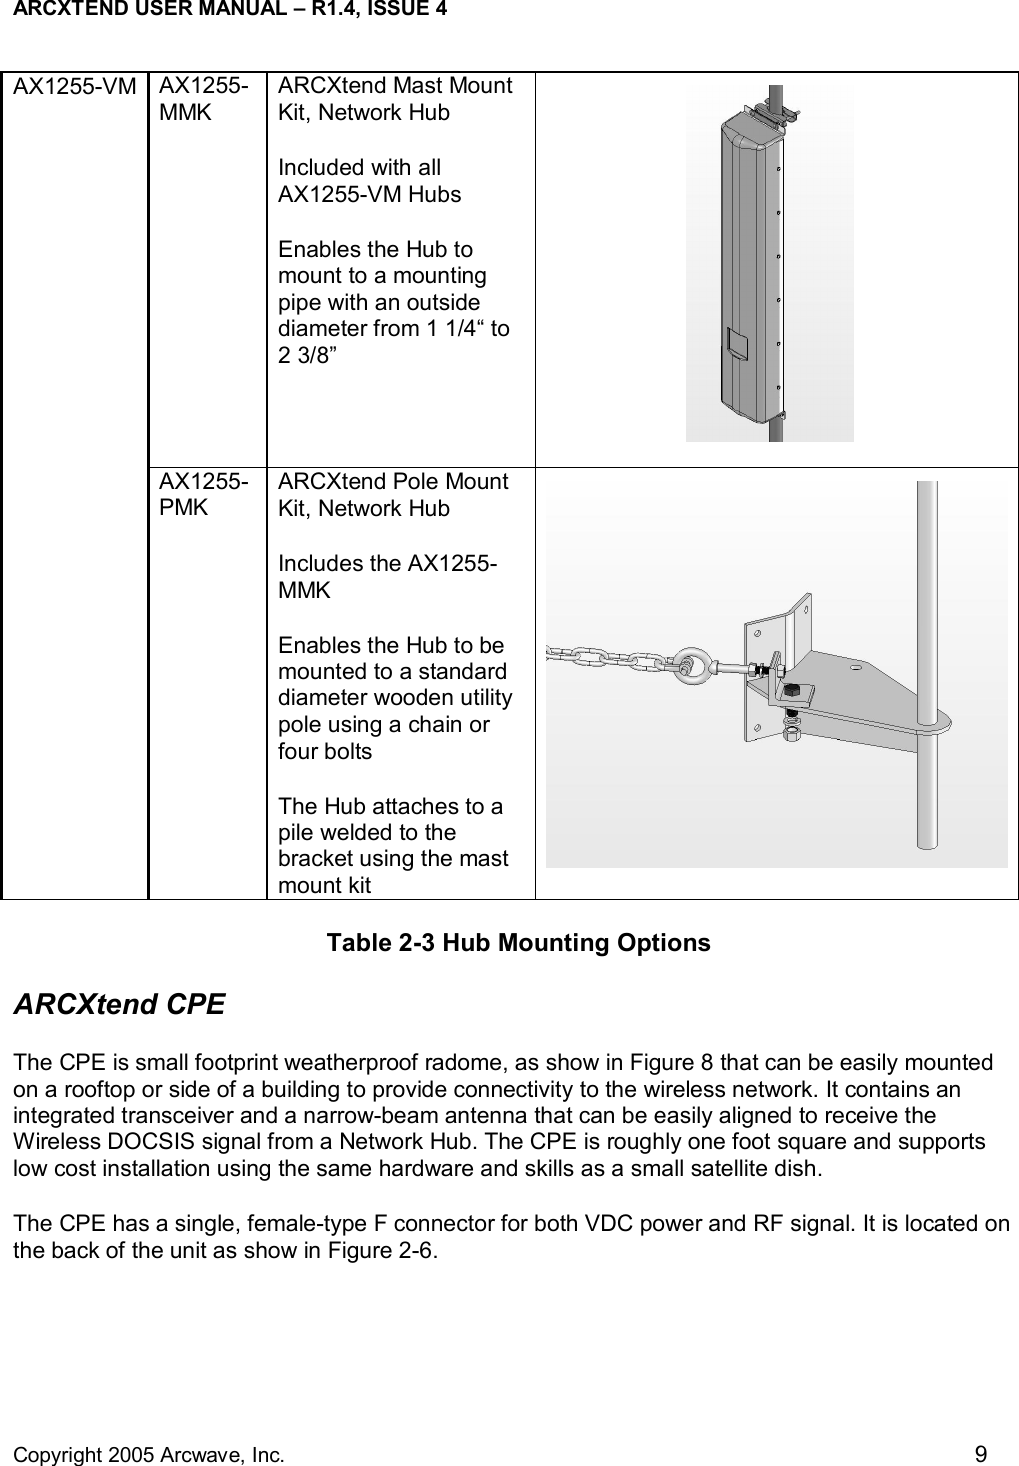 ARCXTEND USER MANUAL – R1.4, ISSUE 4  Copyright 2005 Arcwave, Inc.    9 AX1255-MMK ARCXtend Mast Mount Kit, Network Hub  Included with all AX1255-VM Hubs Enables the Hub to mount to a mounting pipe with an outside diameter from 1 1/4“ to 2 3/8”   AX1255-VM  AX1255-PMK ARCXtend Pole Mount Kit, Network Hub  Includes the AX1255-MMK Enables the Hub to be mounted to a standard diameter wooden utility pole using a chain or four bolts The Hub attaches to a pile welded to the bracket using the mast mount kit   Table 2-3 Hub Mounting Options ARCXtend CPE The CPE is small footprint weatherproof radome, as show in Figure 8 that can be easily mounted on a rooftop or side of a building to provide connectivity to the wireless network. It contains an integrated transceiver and a narrow-beam antenna that can be easily aligned to receive the Wireless DOCSIS signal from a Network Hub. The CPE is roughly one foot square and supports low cost installation using the same hardware and skills as a small satellite dish. The CPE has a single, female-type F connector for both VDC power and RF signal. It is located on the back of the unit as show in Figure 2-6. 